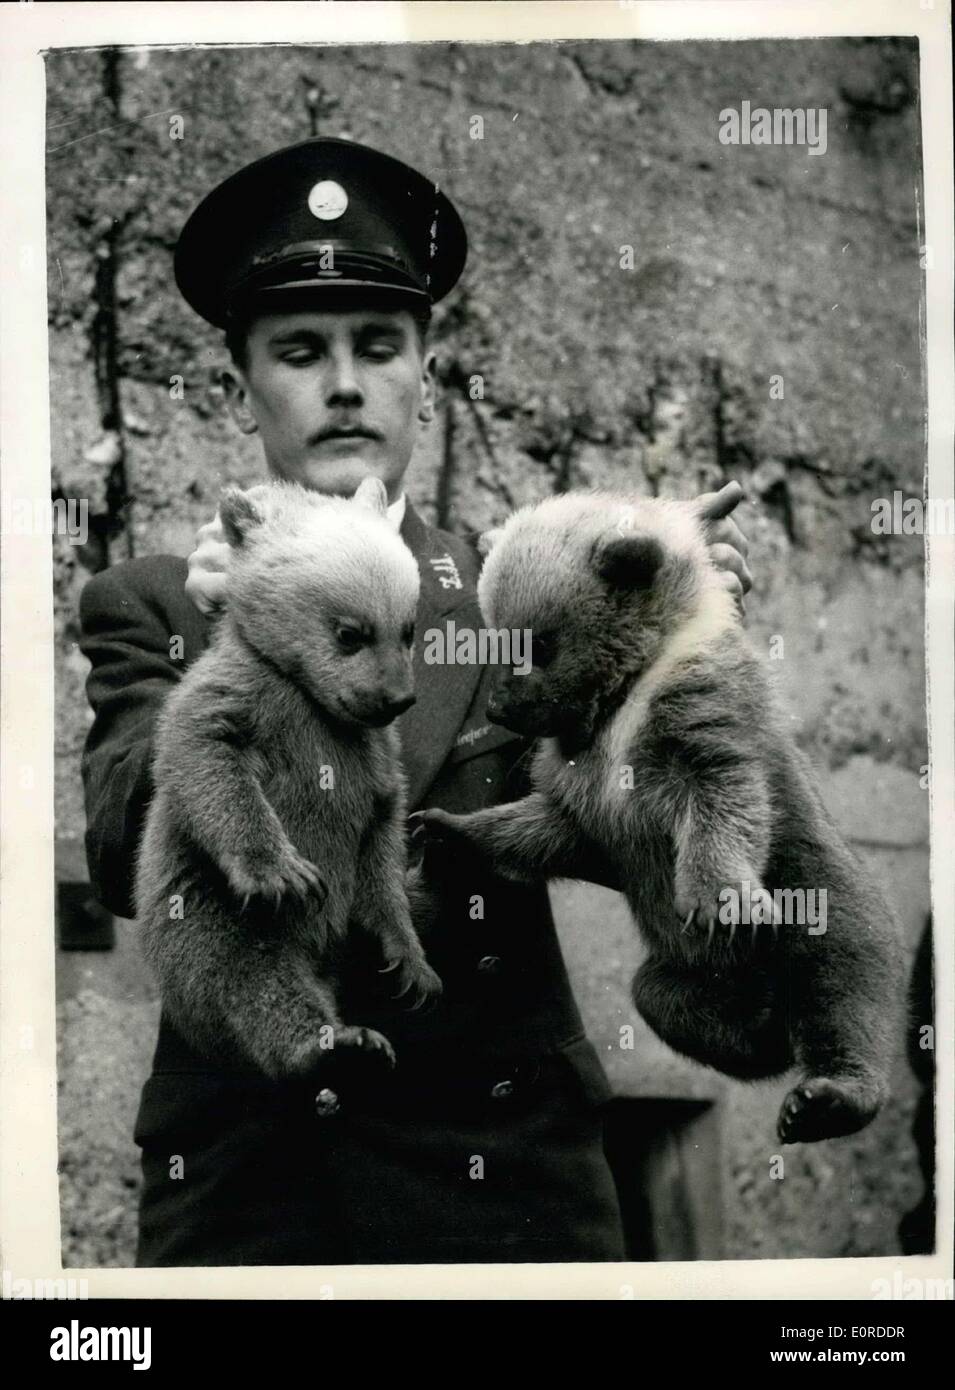 Mar. 05, 1959 - Syrian Bear Twins - at the London Zoo... The Syrian Bear Twins - born two months ago at the London Zoo - were separated from their mother for the first time this morning - and were seen by members of the public... They are both males - and weigh approx 8 1/2 lbs each. Keystone Photo Shows: Keeper Ted Andrews with the two bear cubs at the London Zoo this morning. Stock Photo